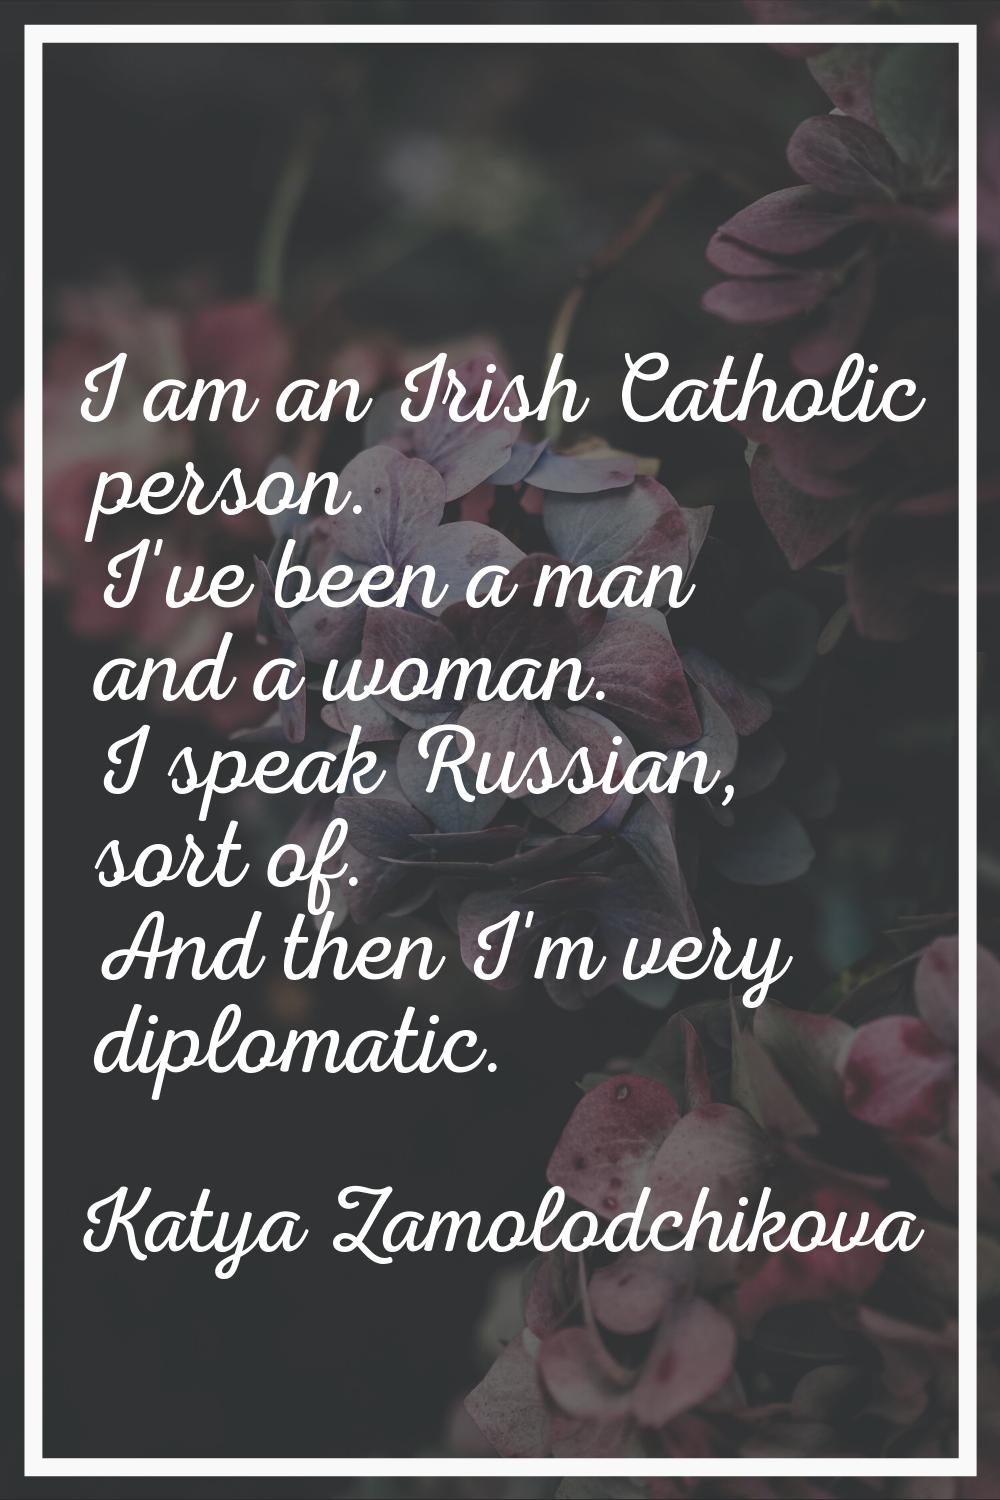 I am an Irish Catholic person. I've been a man and a woman. I speak Russian, sort of. And then I'm 